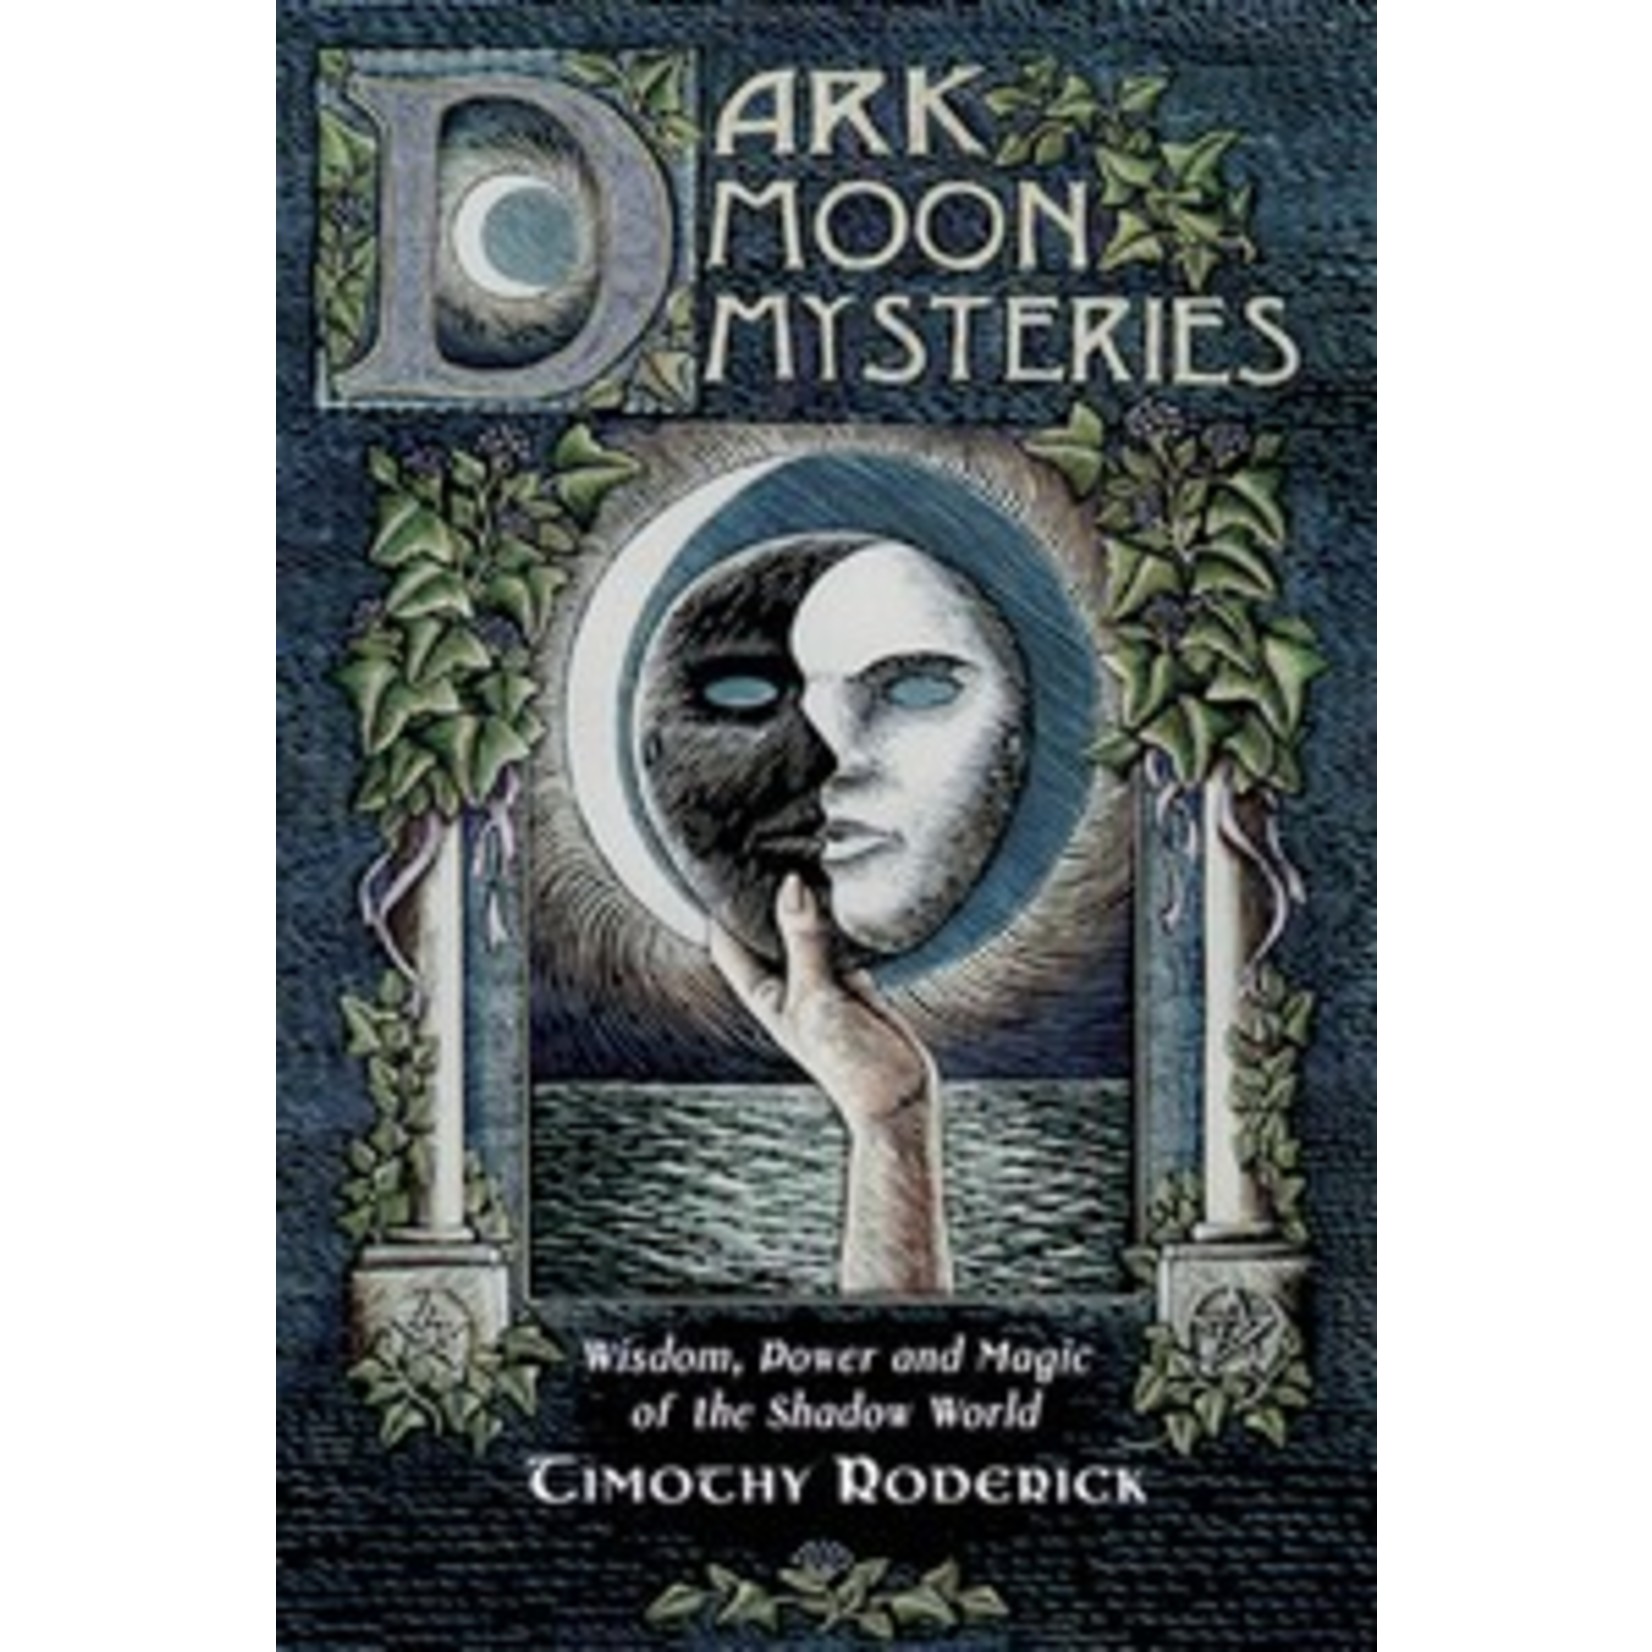 Dark Moon Mysteries: Wisdom, Power, and Magic in the Shadow World by Timothy Roderick